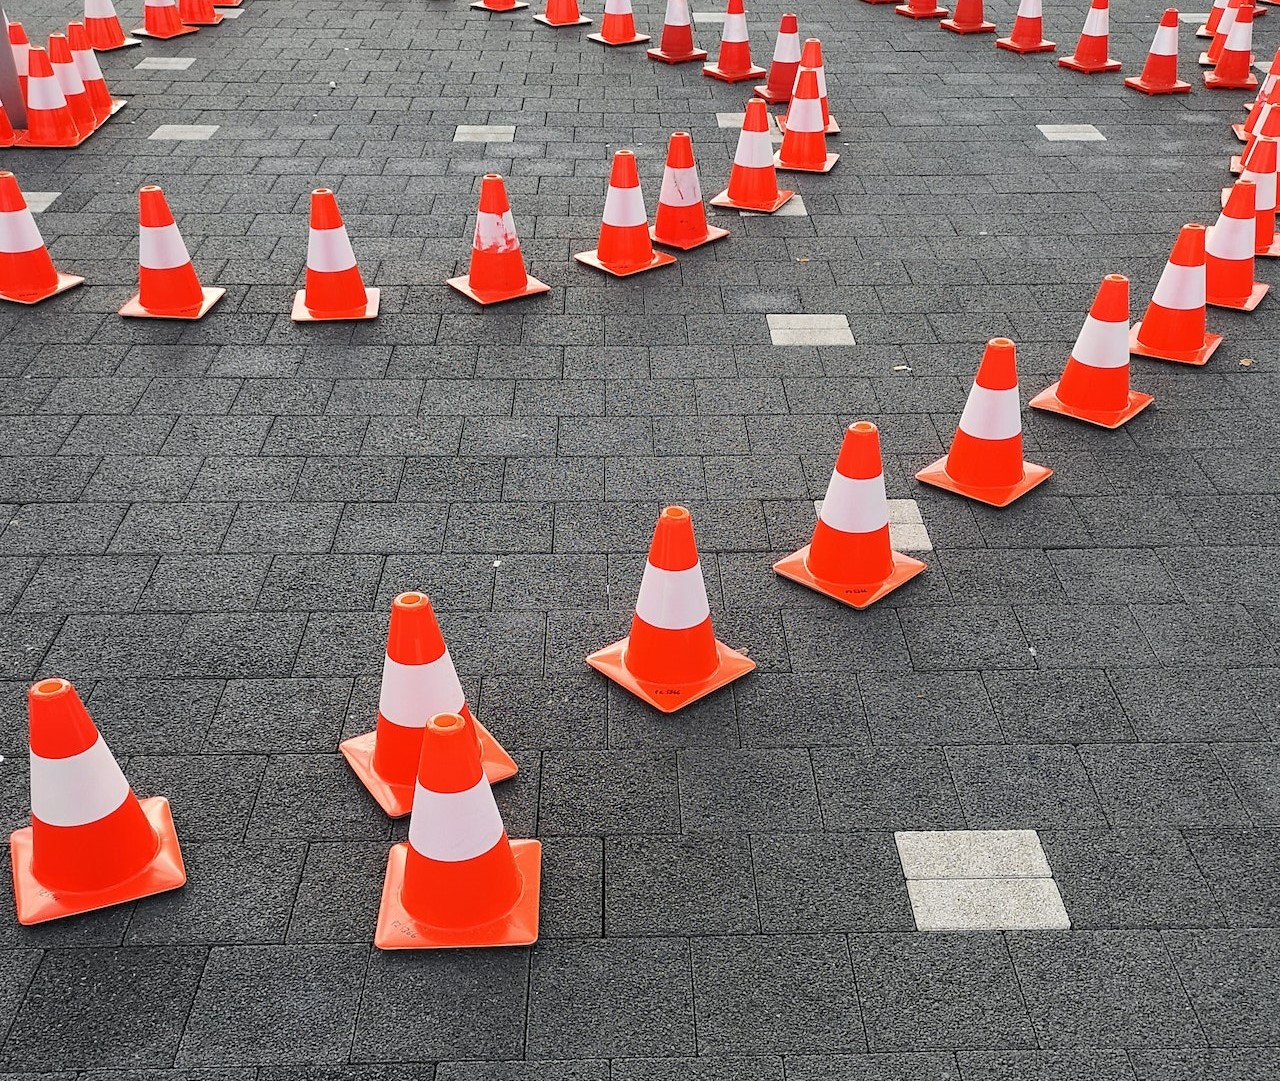 traffic cones set out during a driving test